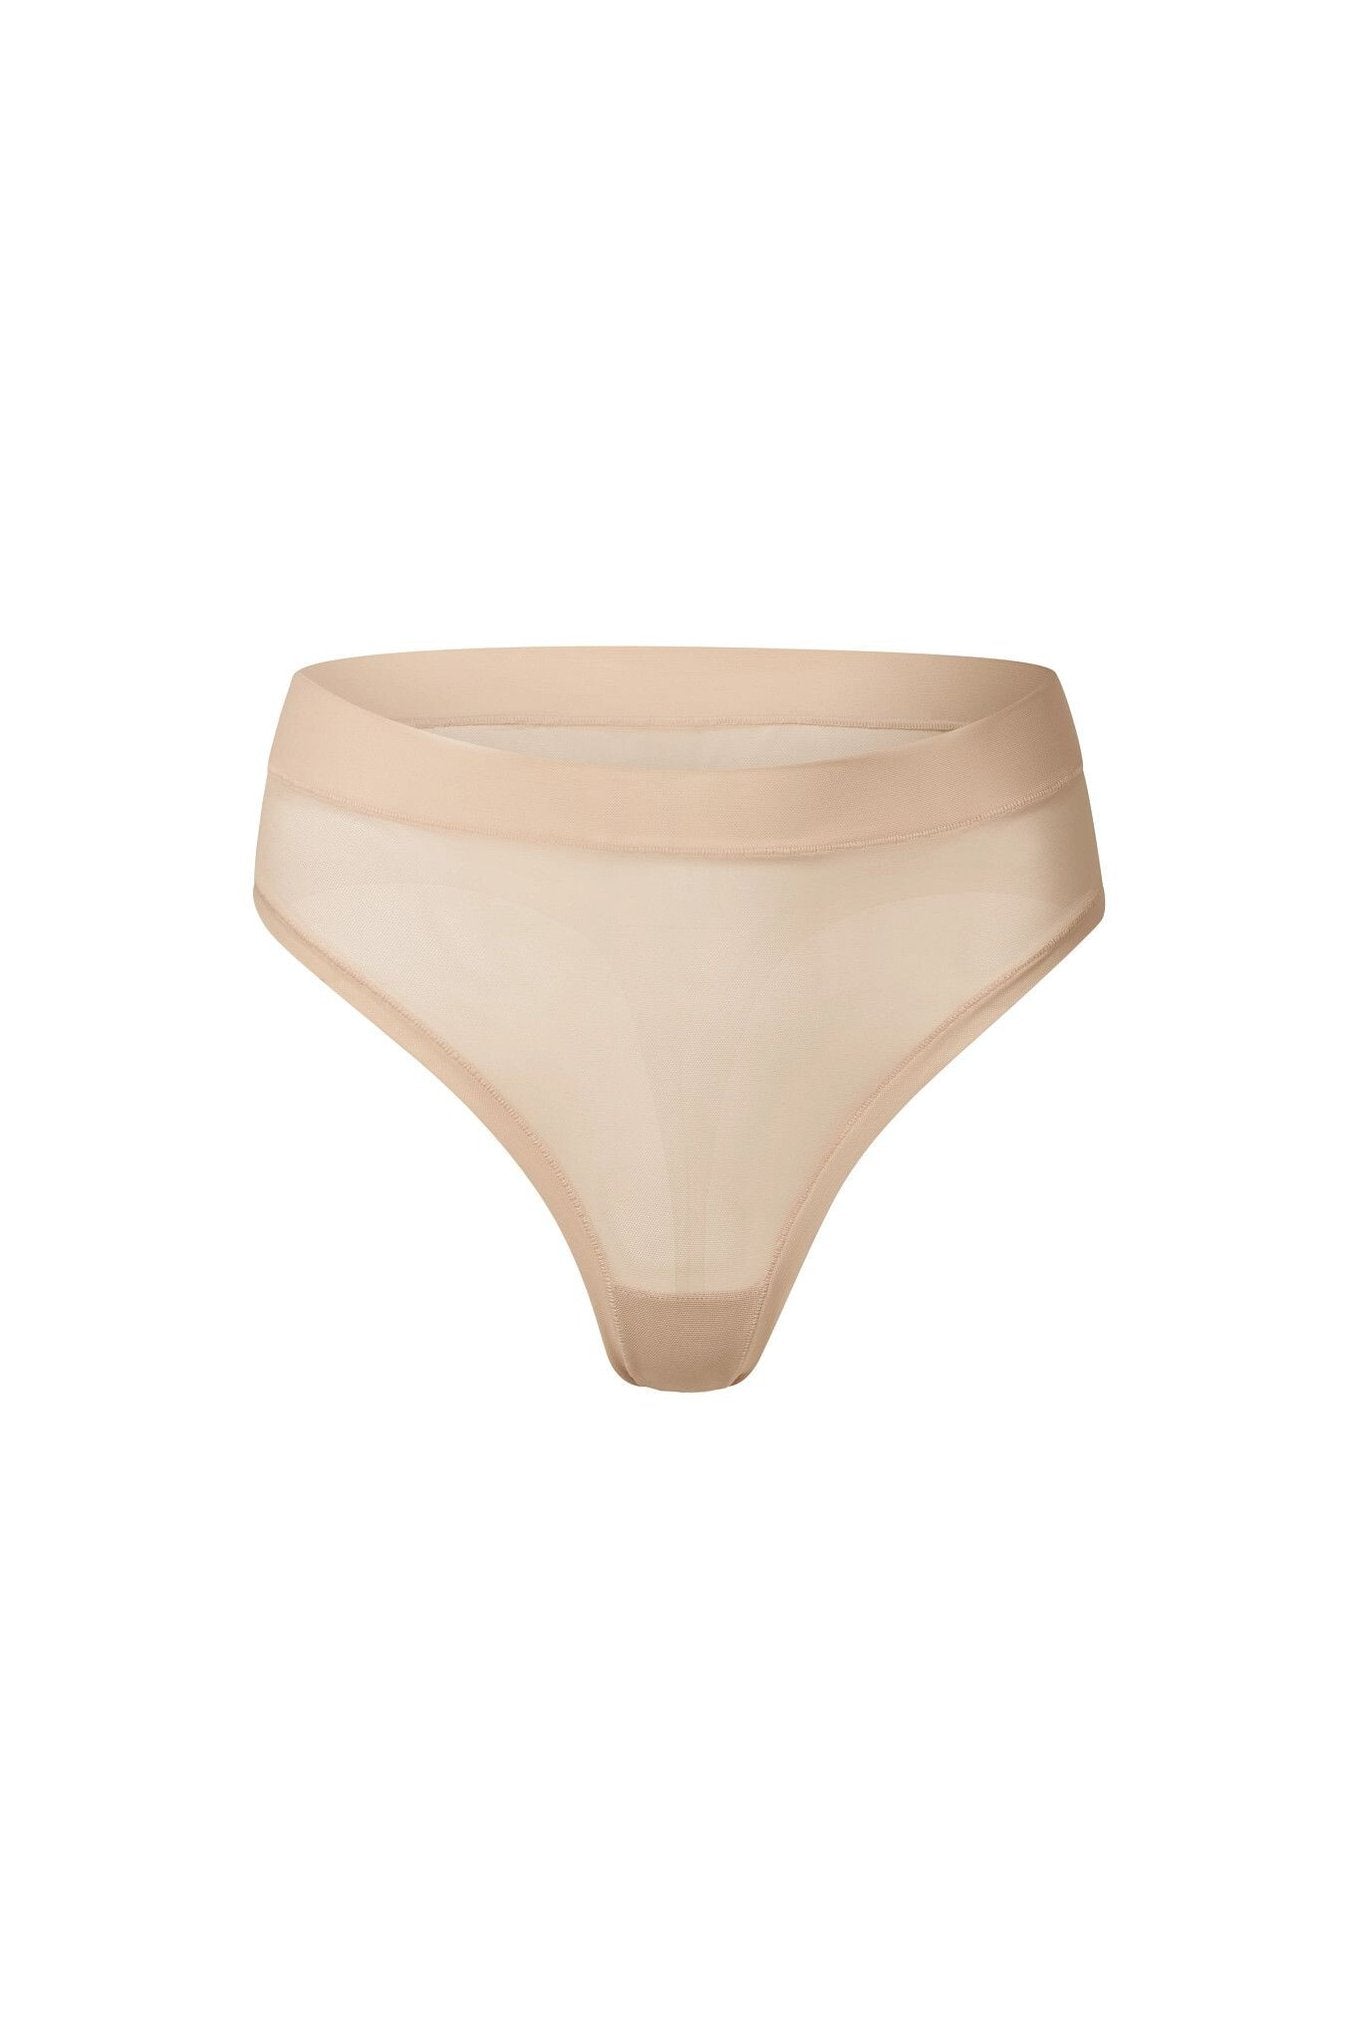 nueskin Carey Mesh Mid-Rise Thong in color Appleblossom and shape thong